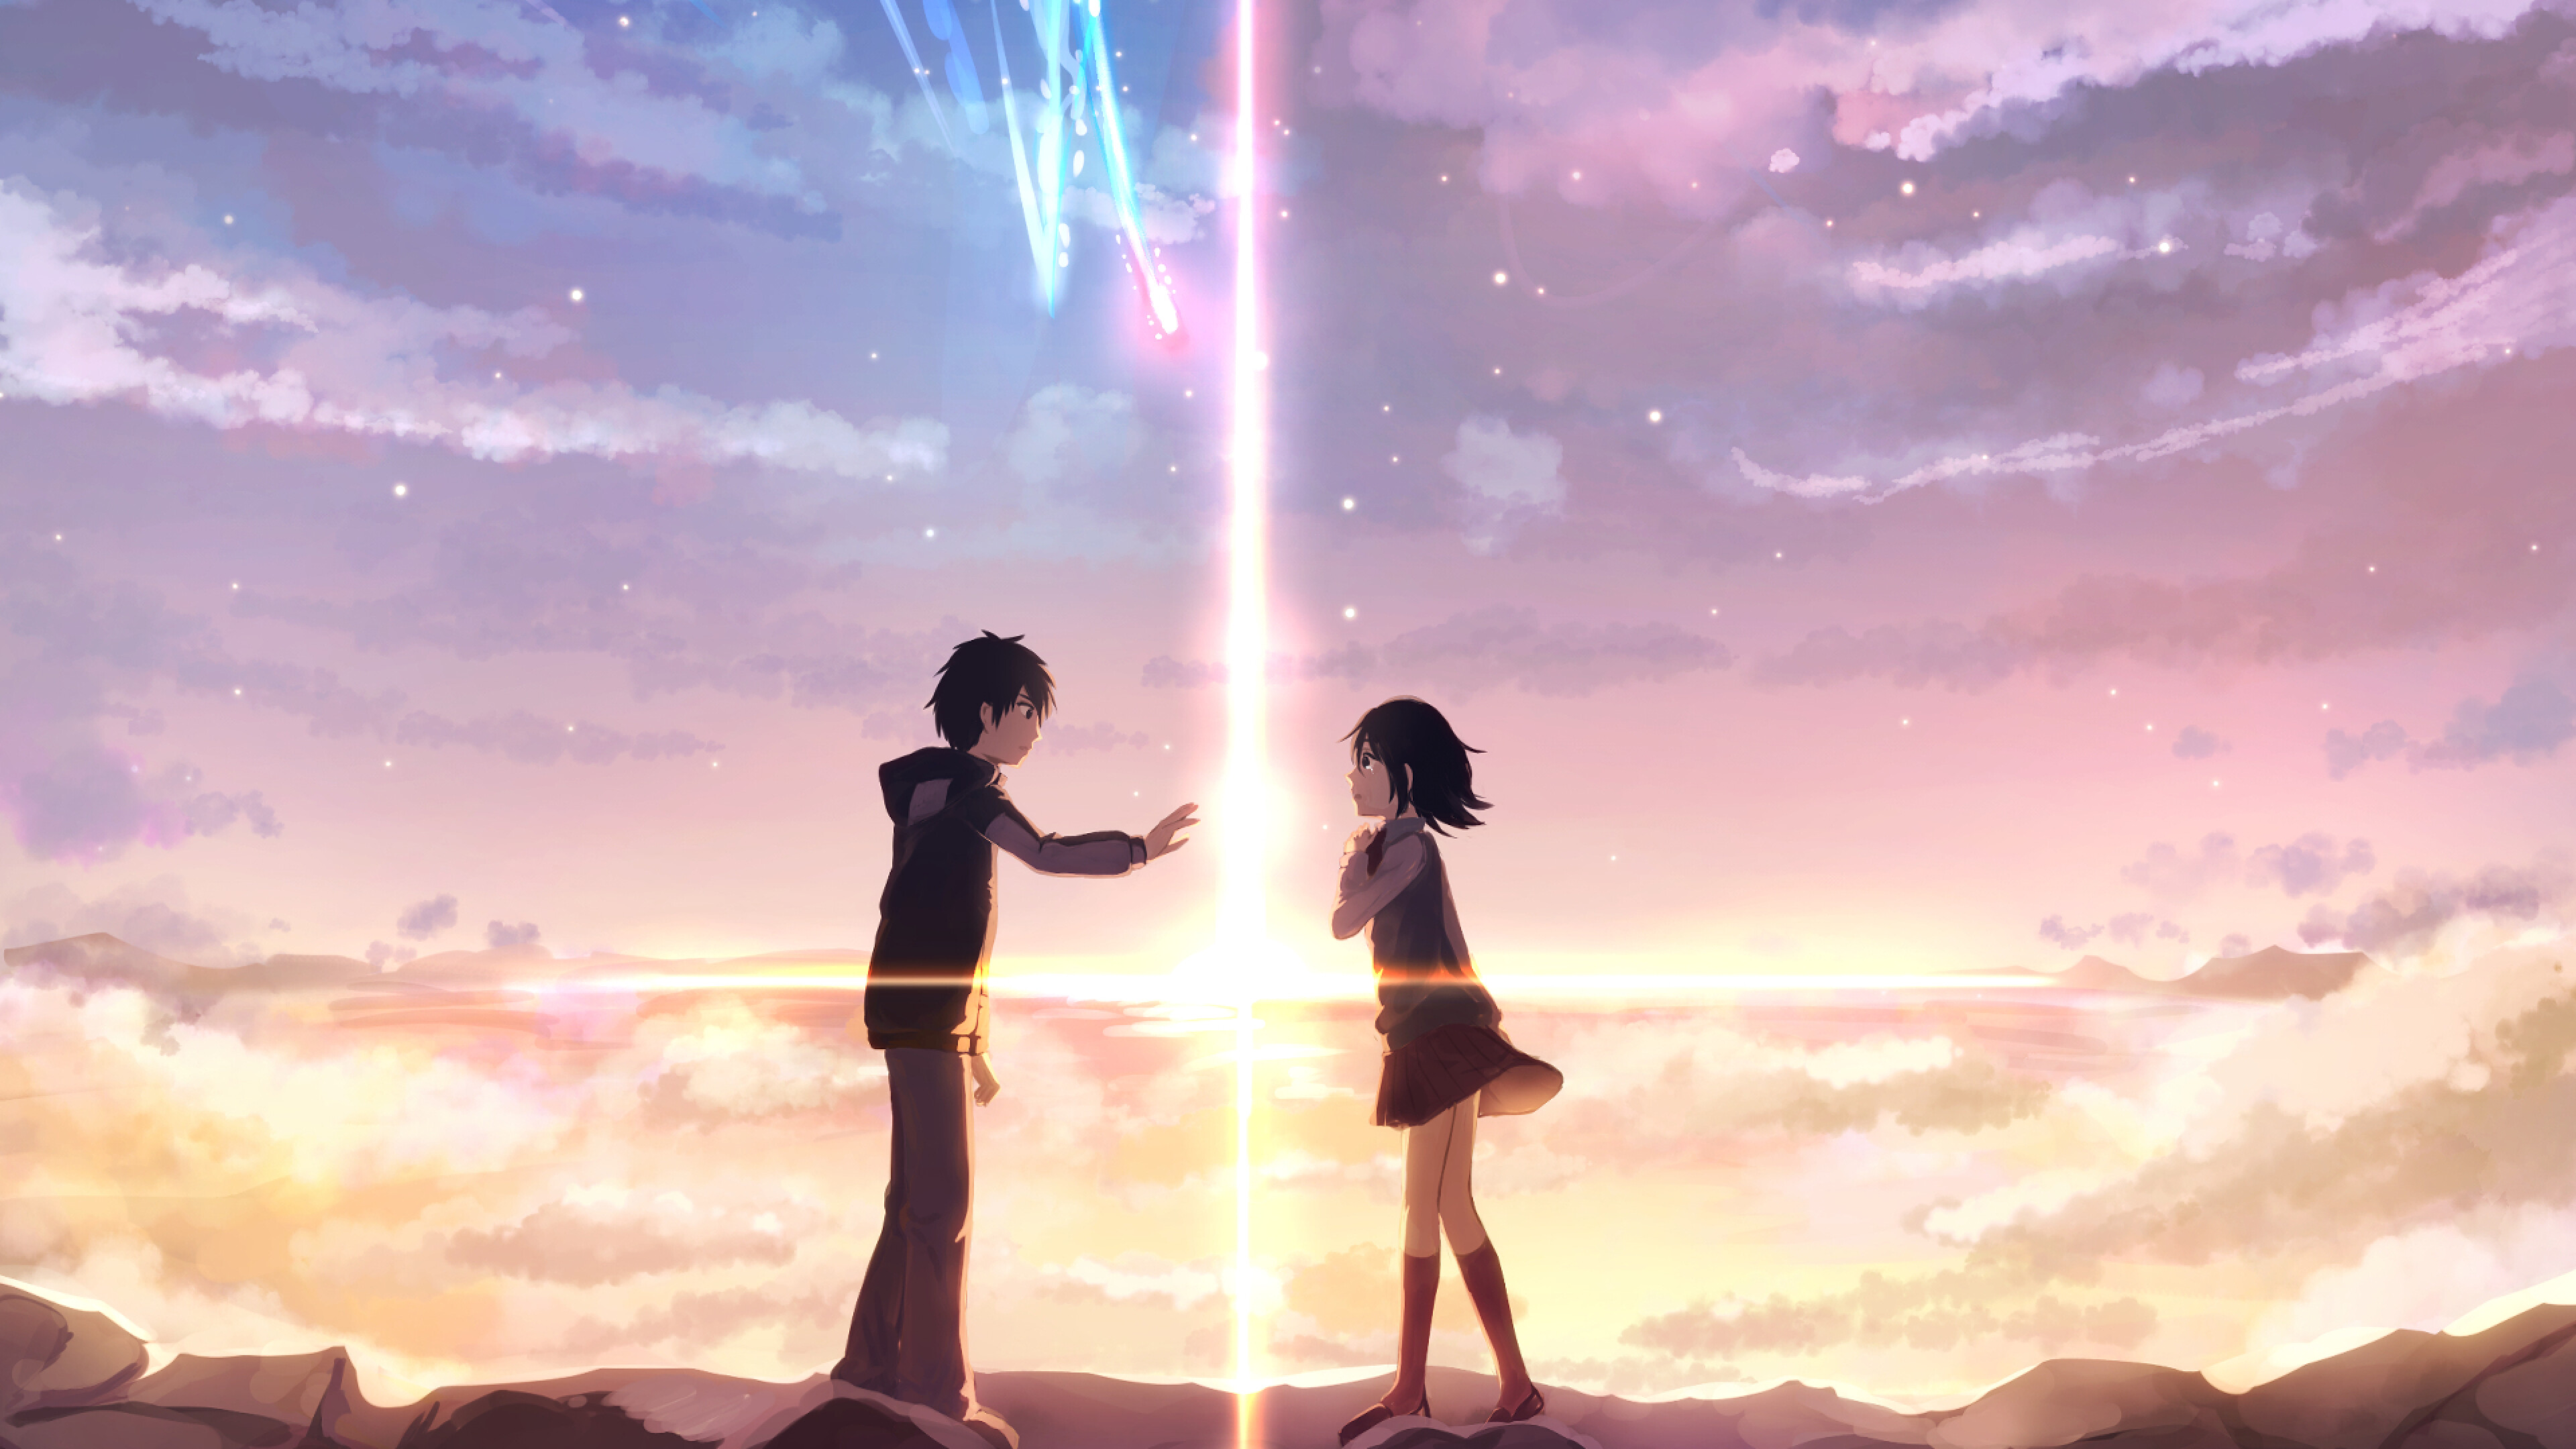 Your Name: The third highest-grossing anime film of all time, unadjusted for inflation. 3840x2160 4K Wallpaper.